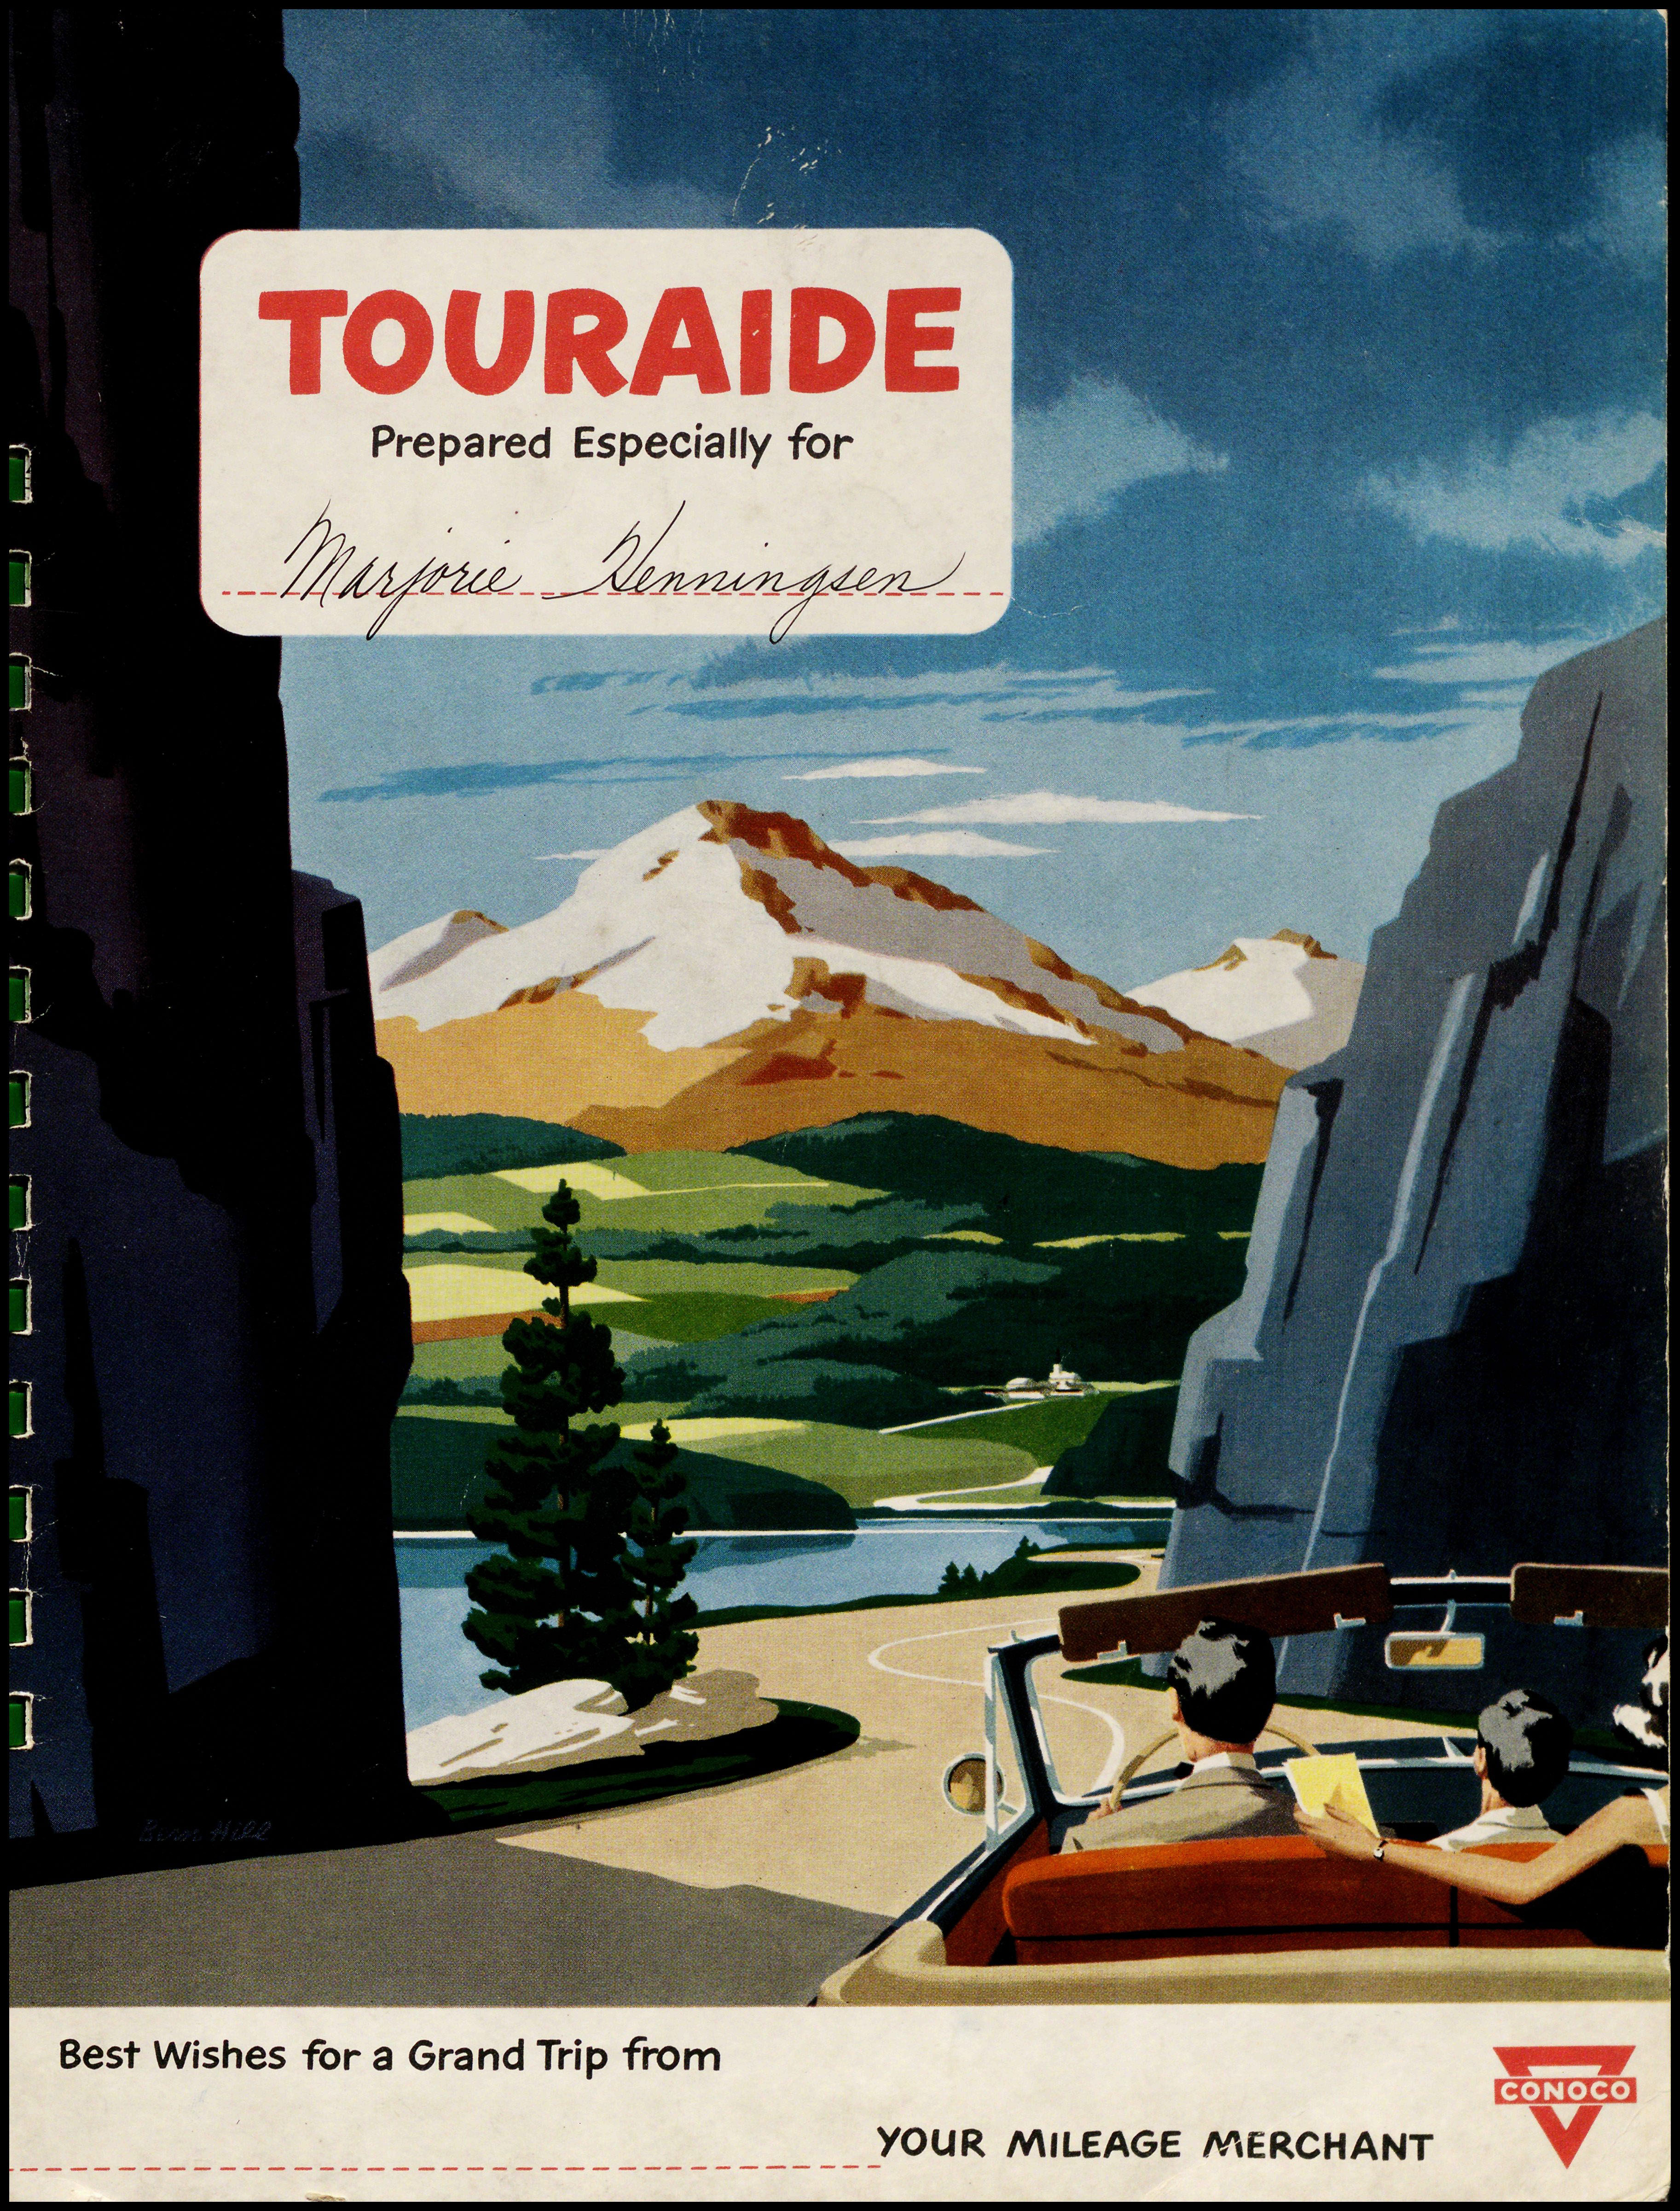 Touraide. Prepared especially for Marjorie Henningsen. Map © Rand McNally. Reproduced with Permission, R.L. 15-S-004